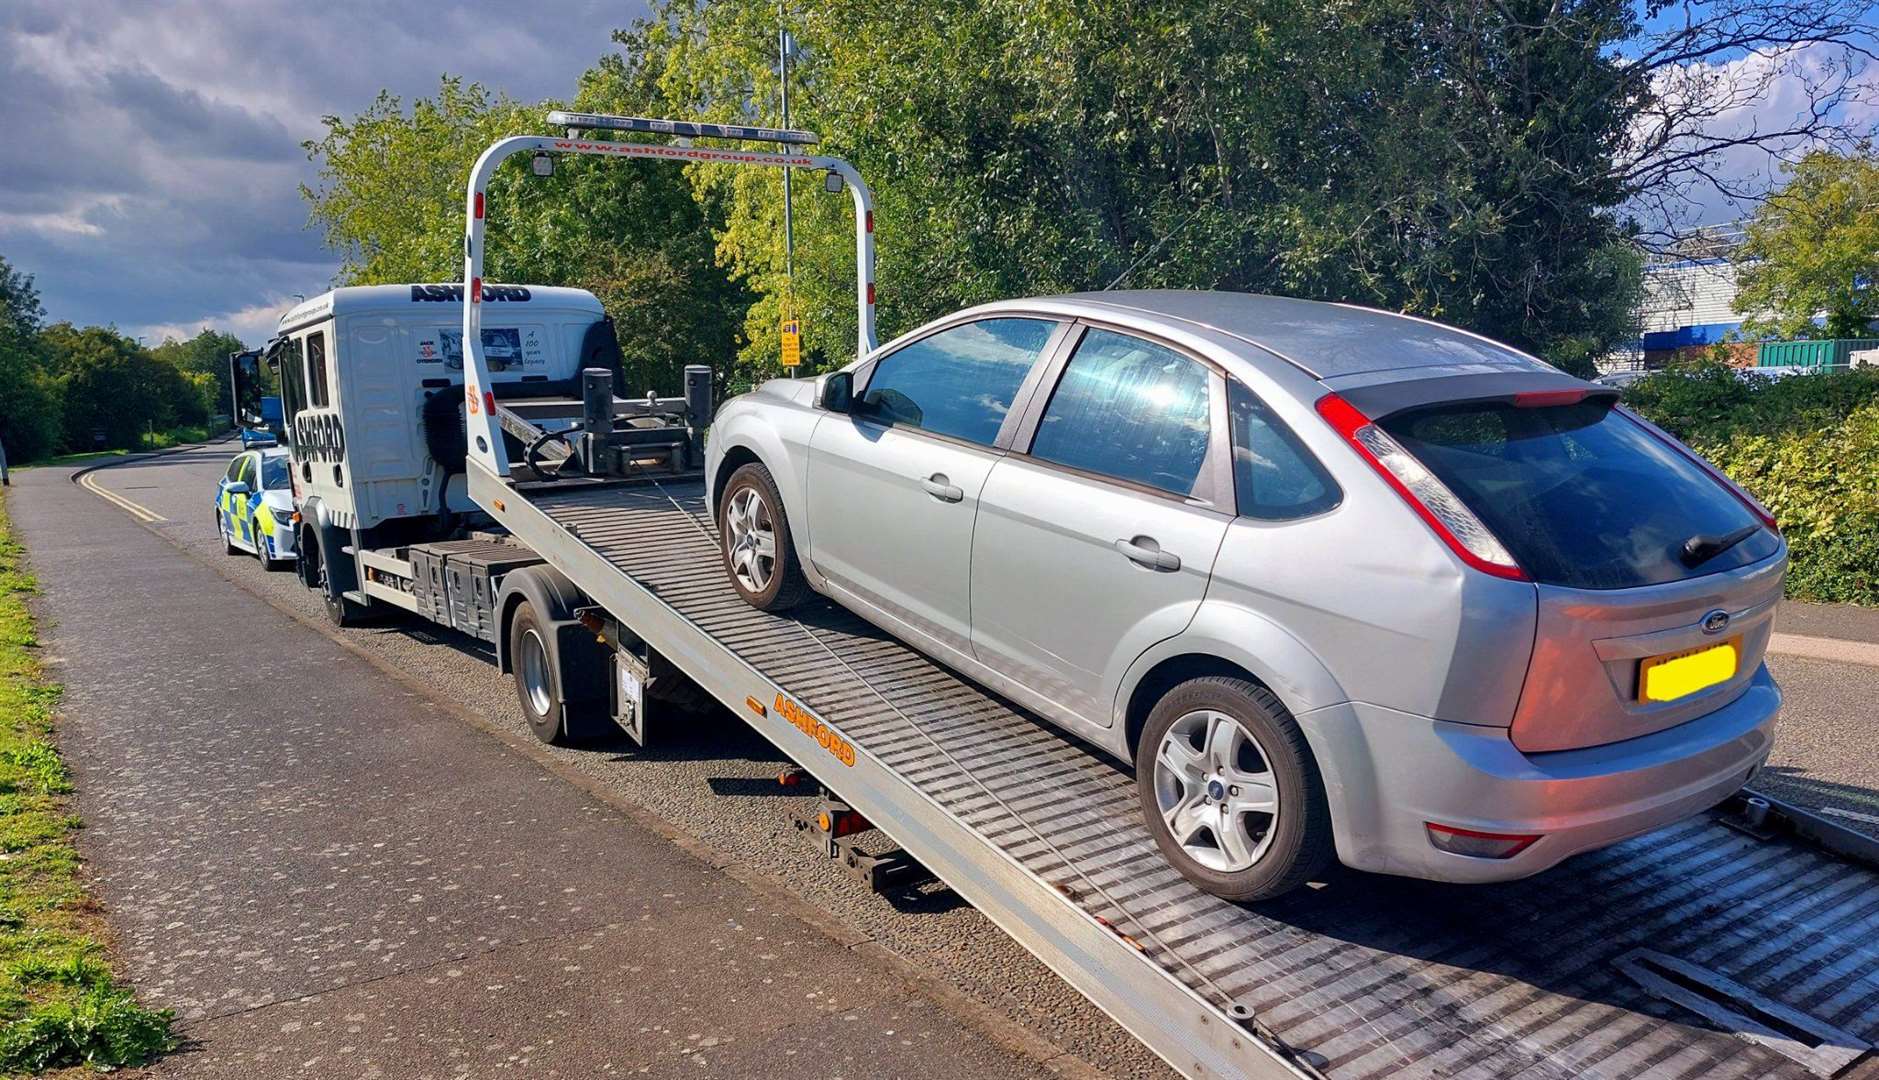 The Ford Focus was seized in Ashford. Picture: Kent Police